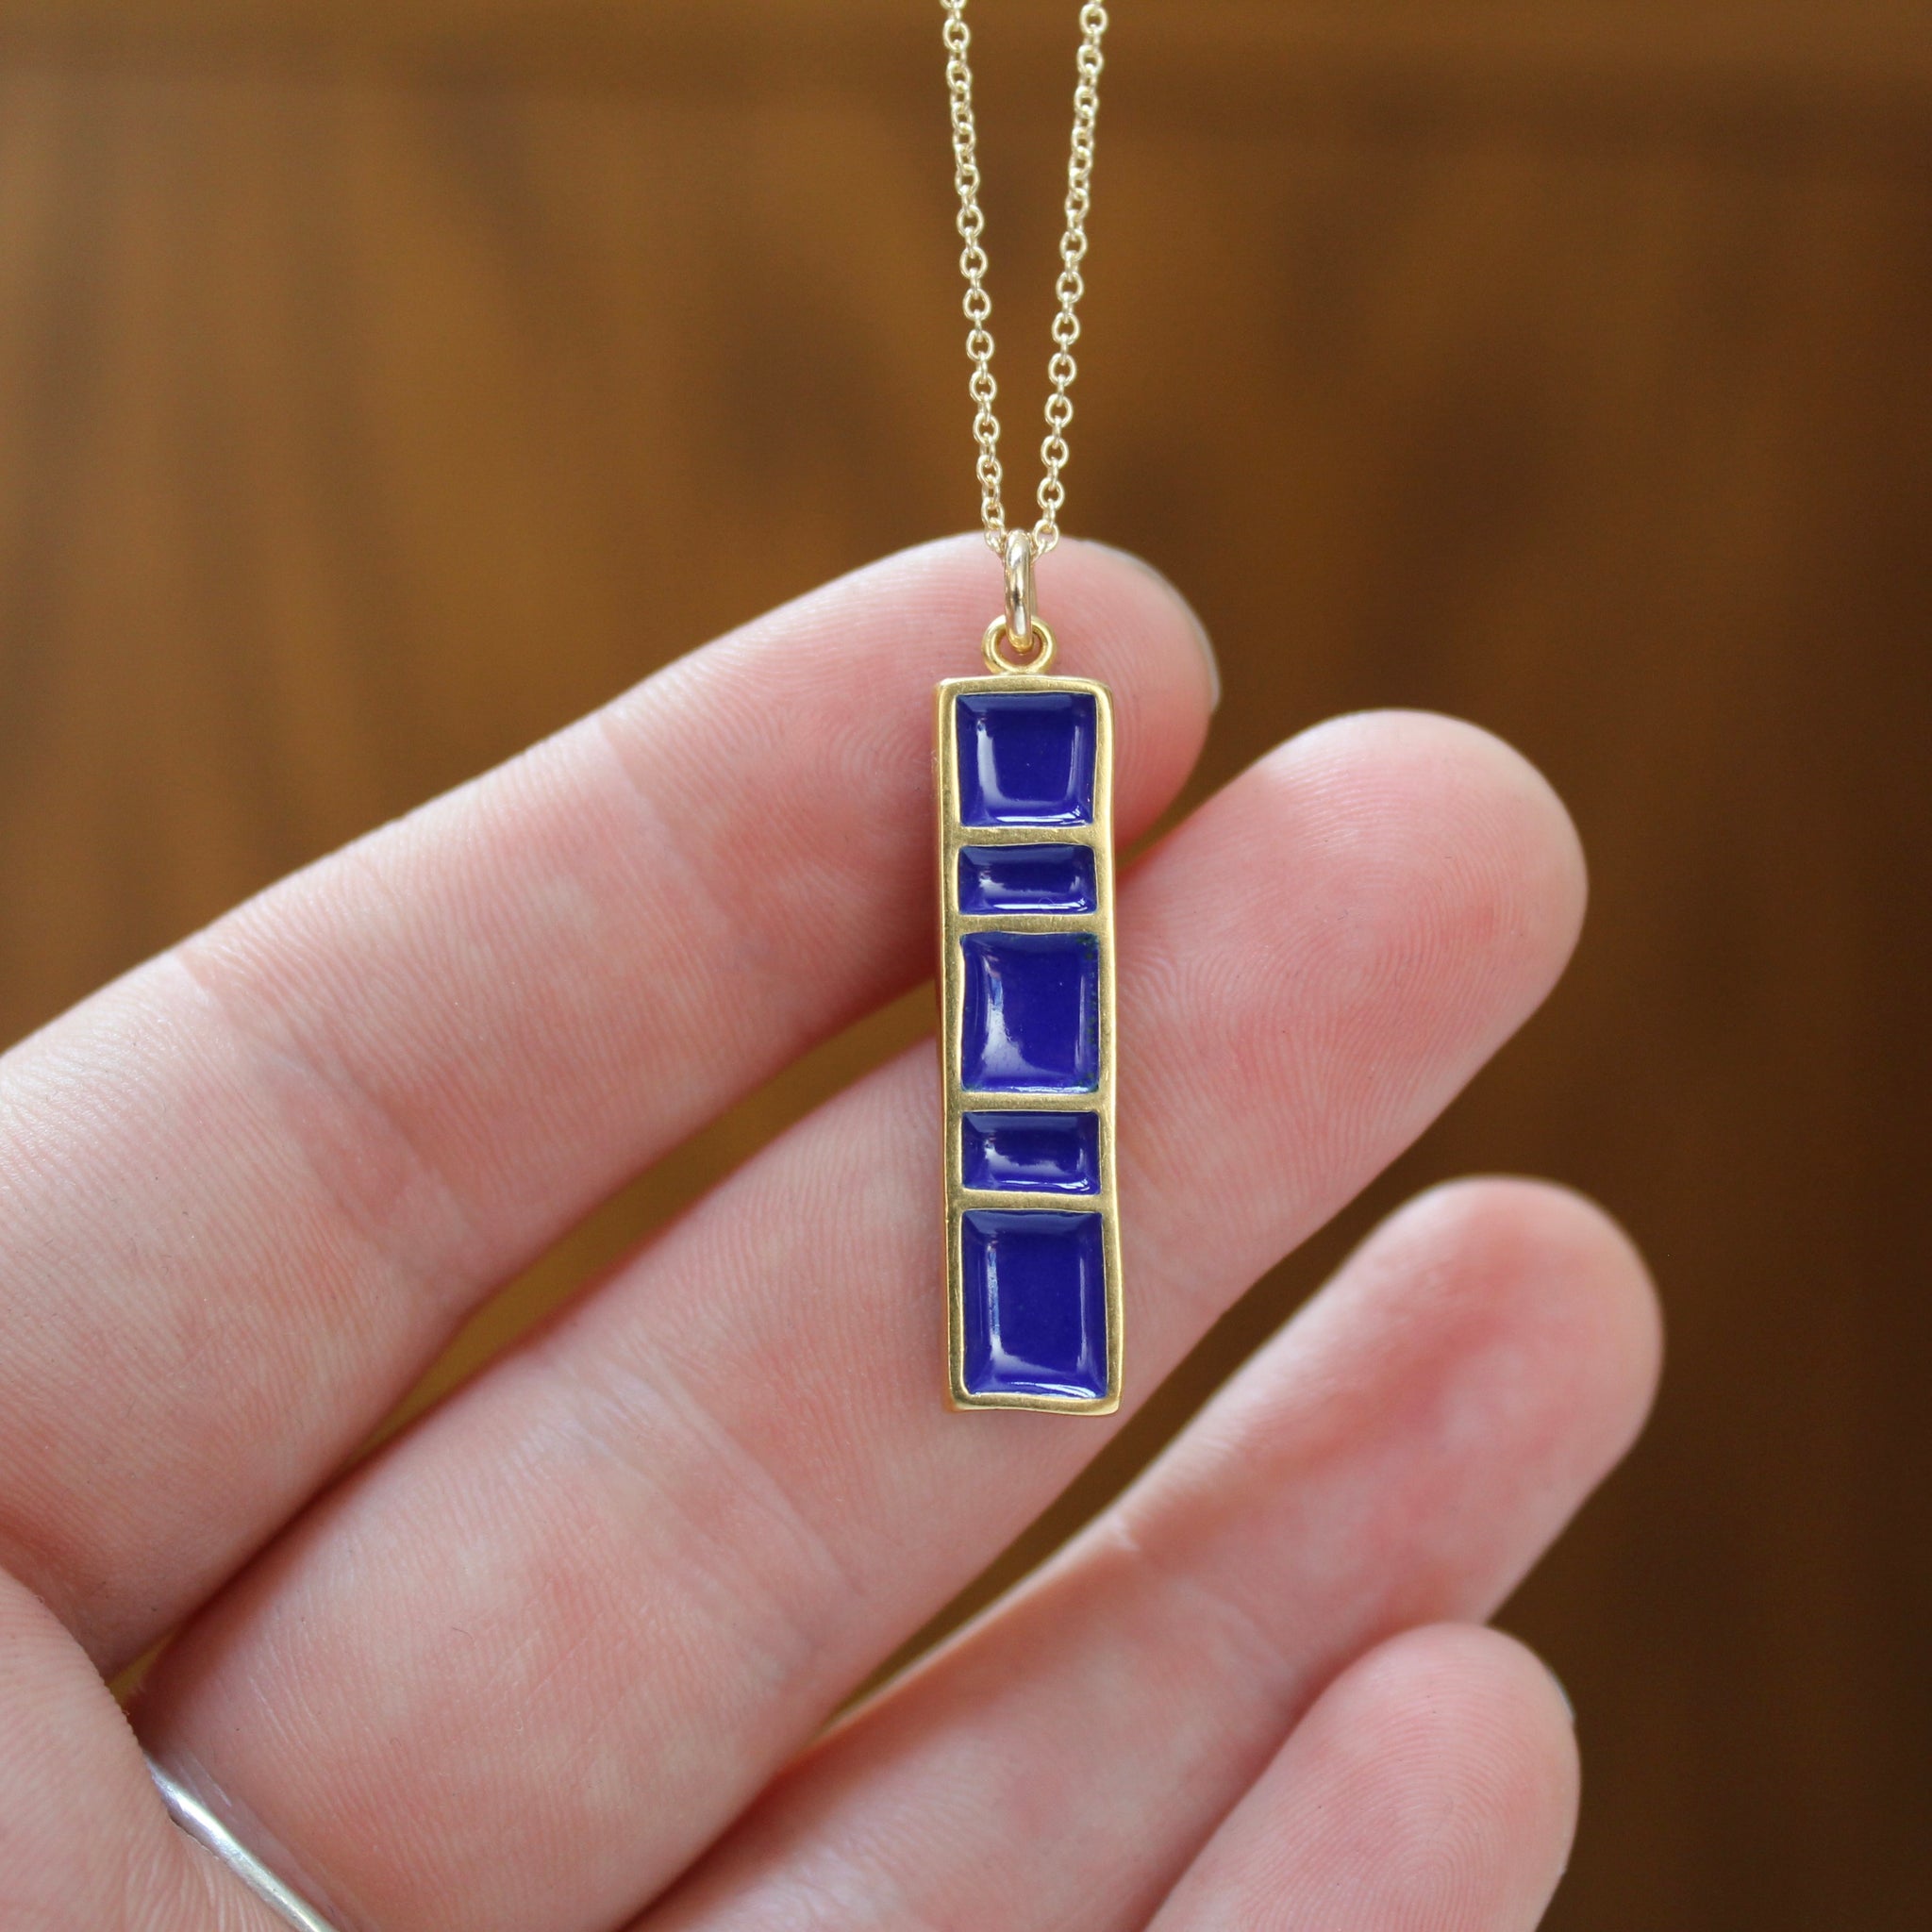 White & Cobalt Blue Statement Necklace with Dazzling Crystal Pendant F –  JoEl handmade